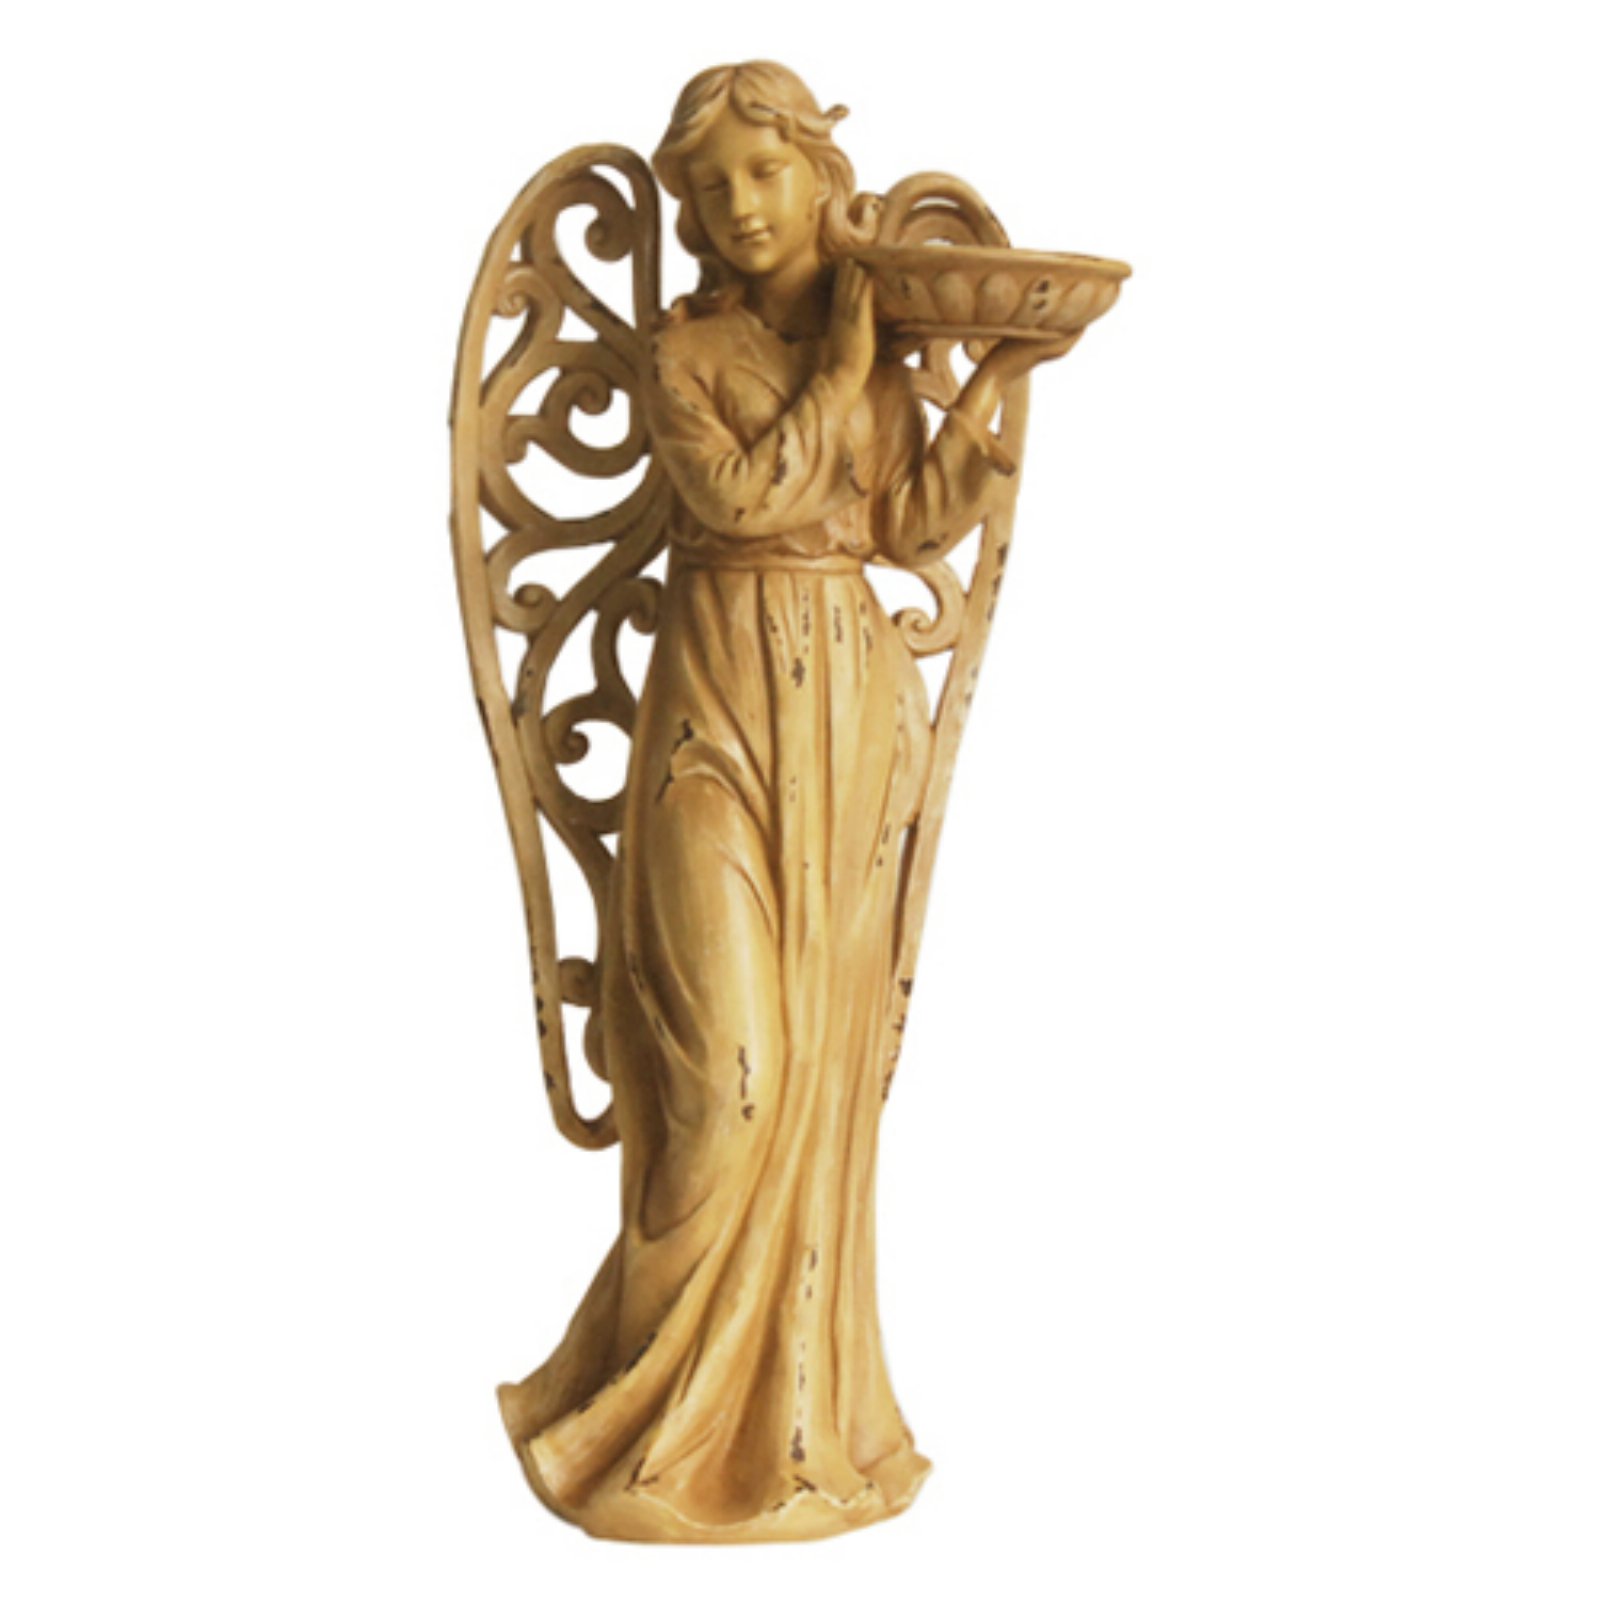 Northlight Tranquil Angel with Scrollwork Wings Outdoor Birdbath - image 1 of 2